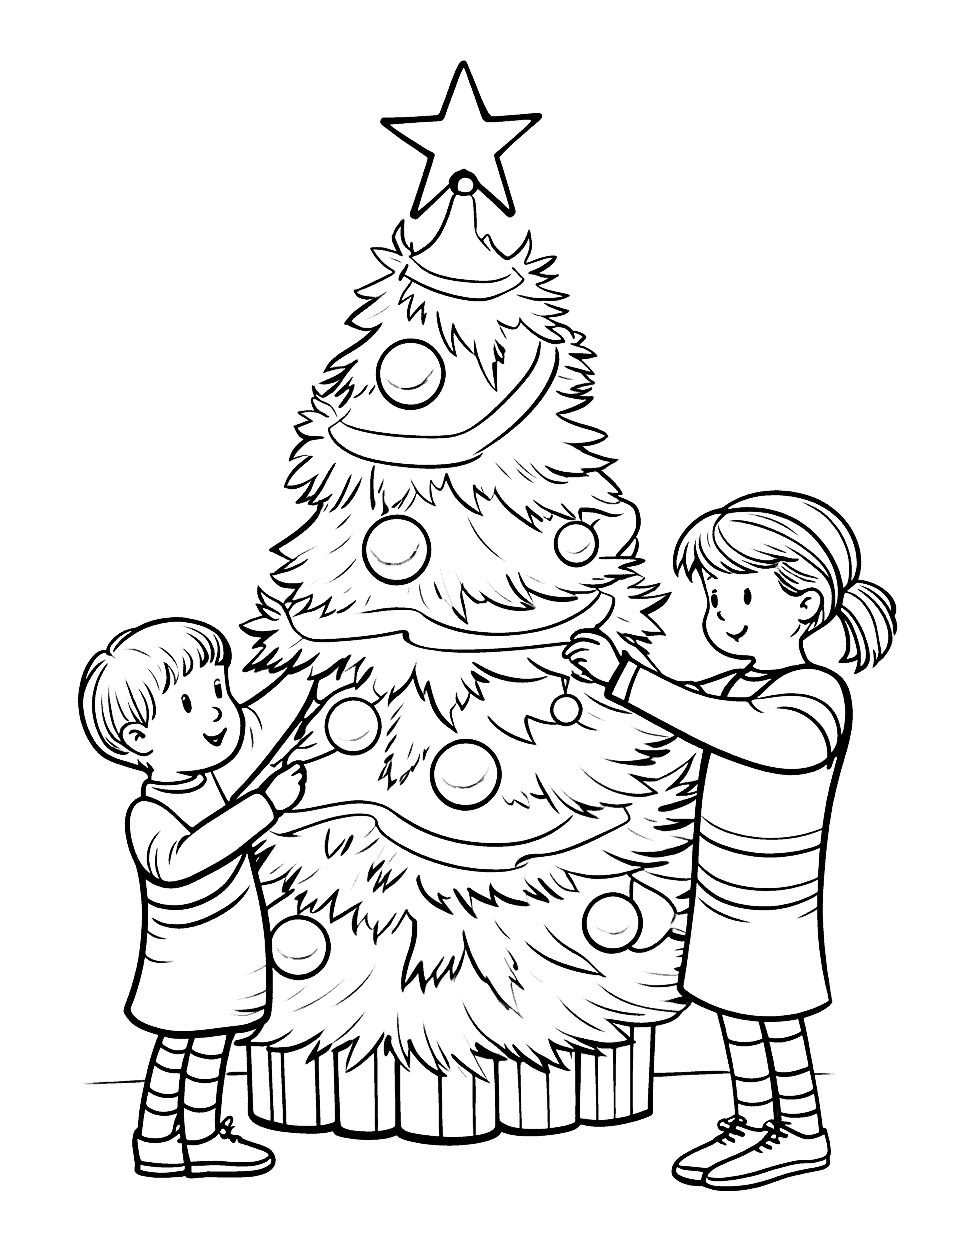 Decorating the Tree Christmas Coloring Page - Kids hanging ornaments on a large, twinkling Christmas tree.